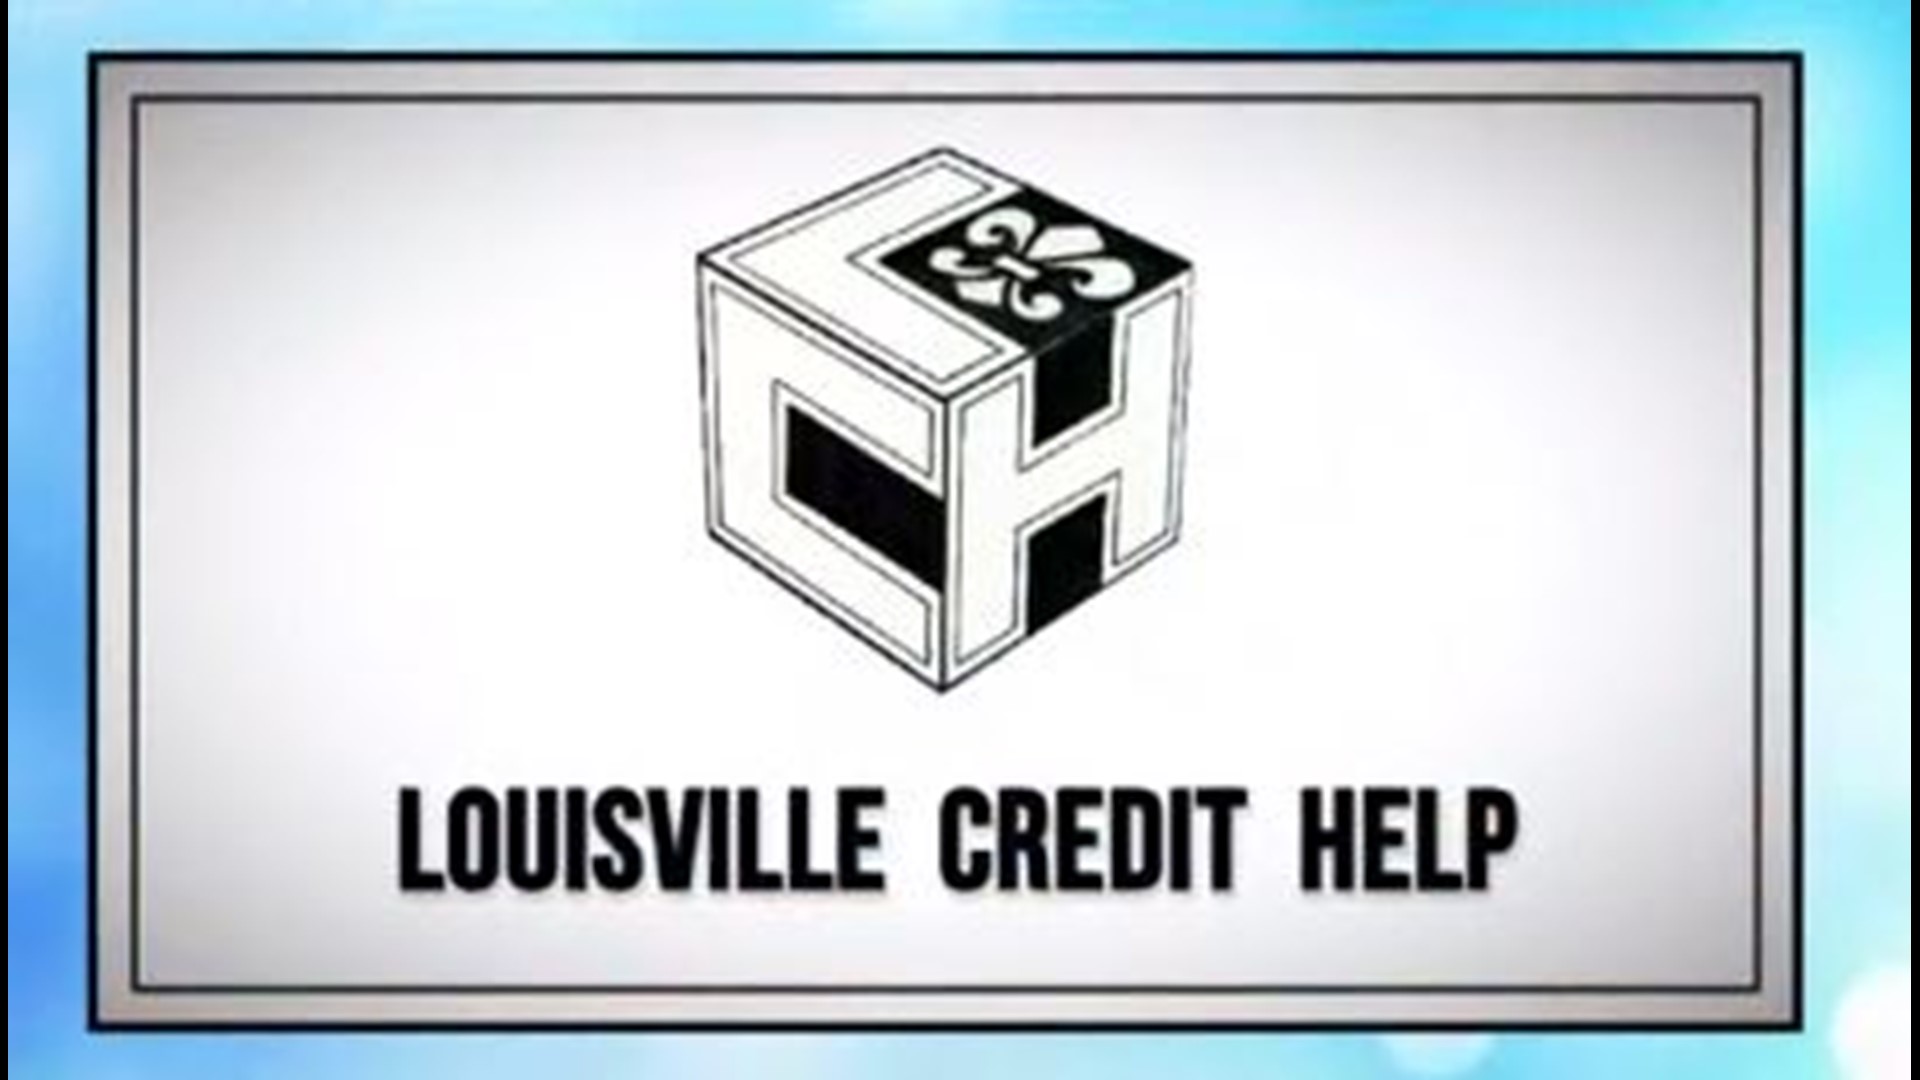 For more information, call 502-295-4400 or go to LouisvilleCreditHelp.com.